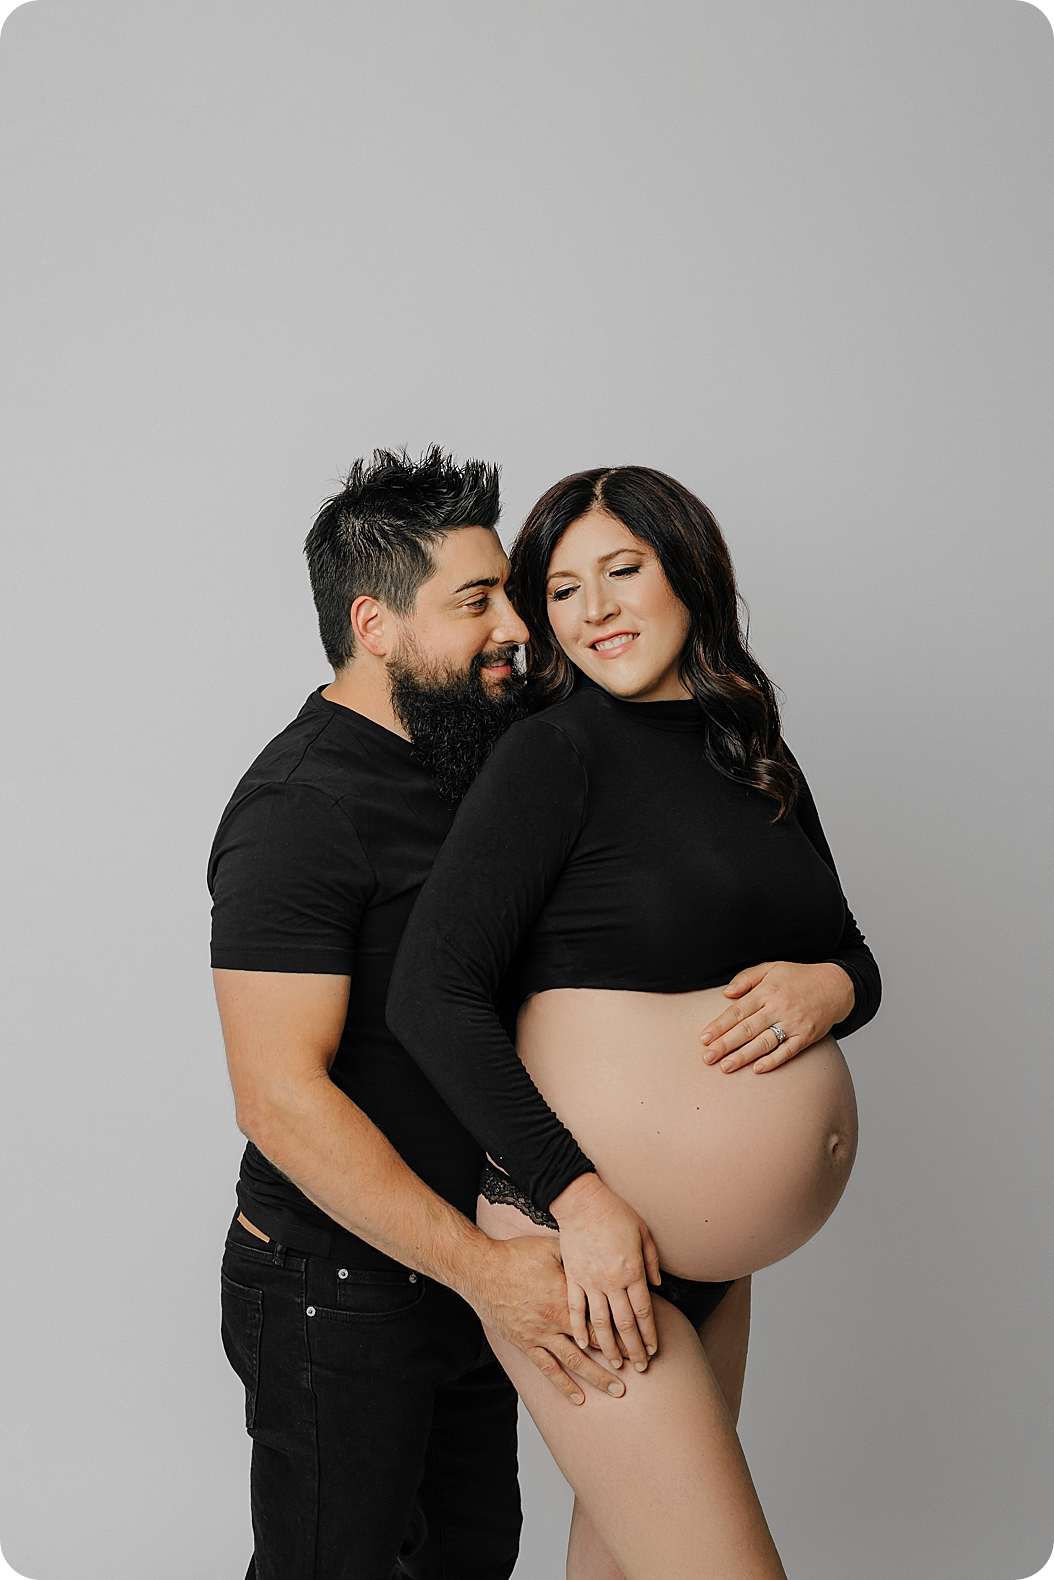 expecting parents pose together during studio maternity session